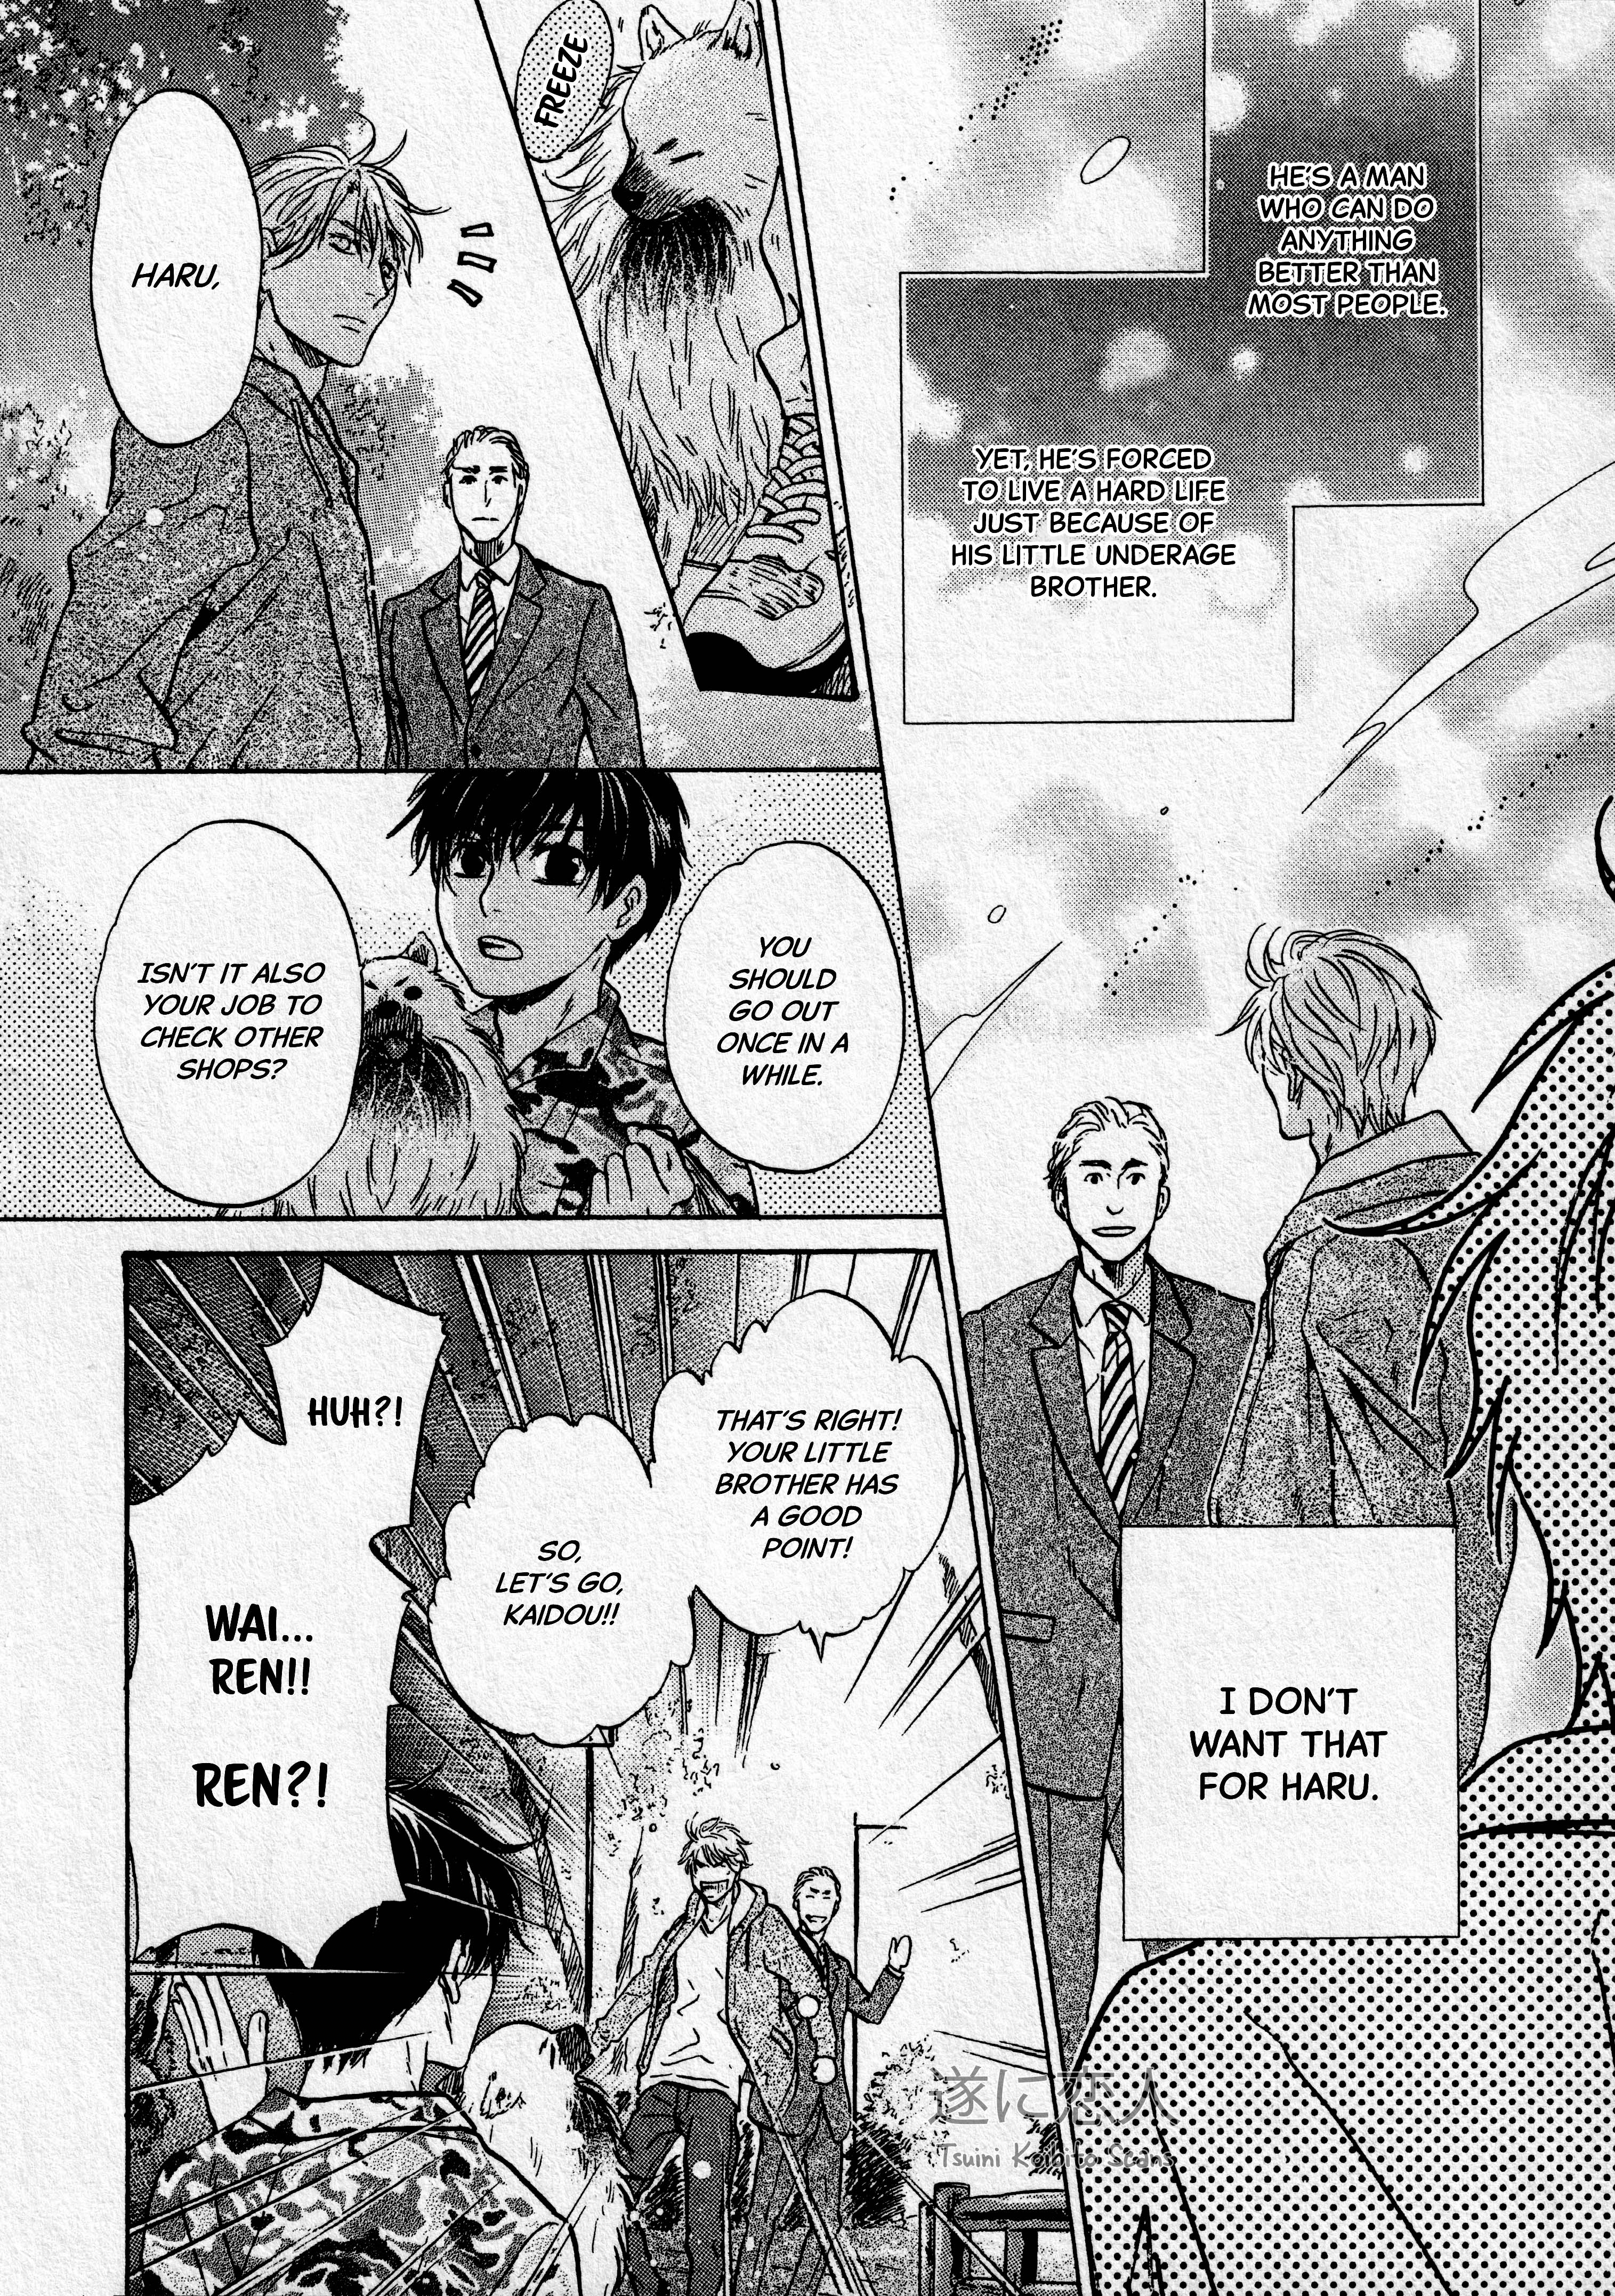 Super Lovers - 44 page 20-f9046c29